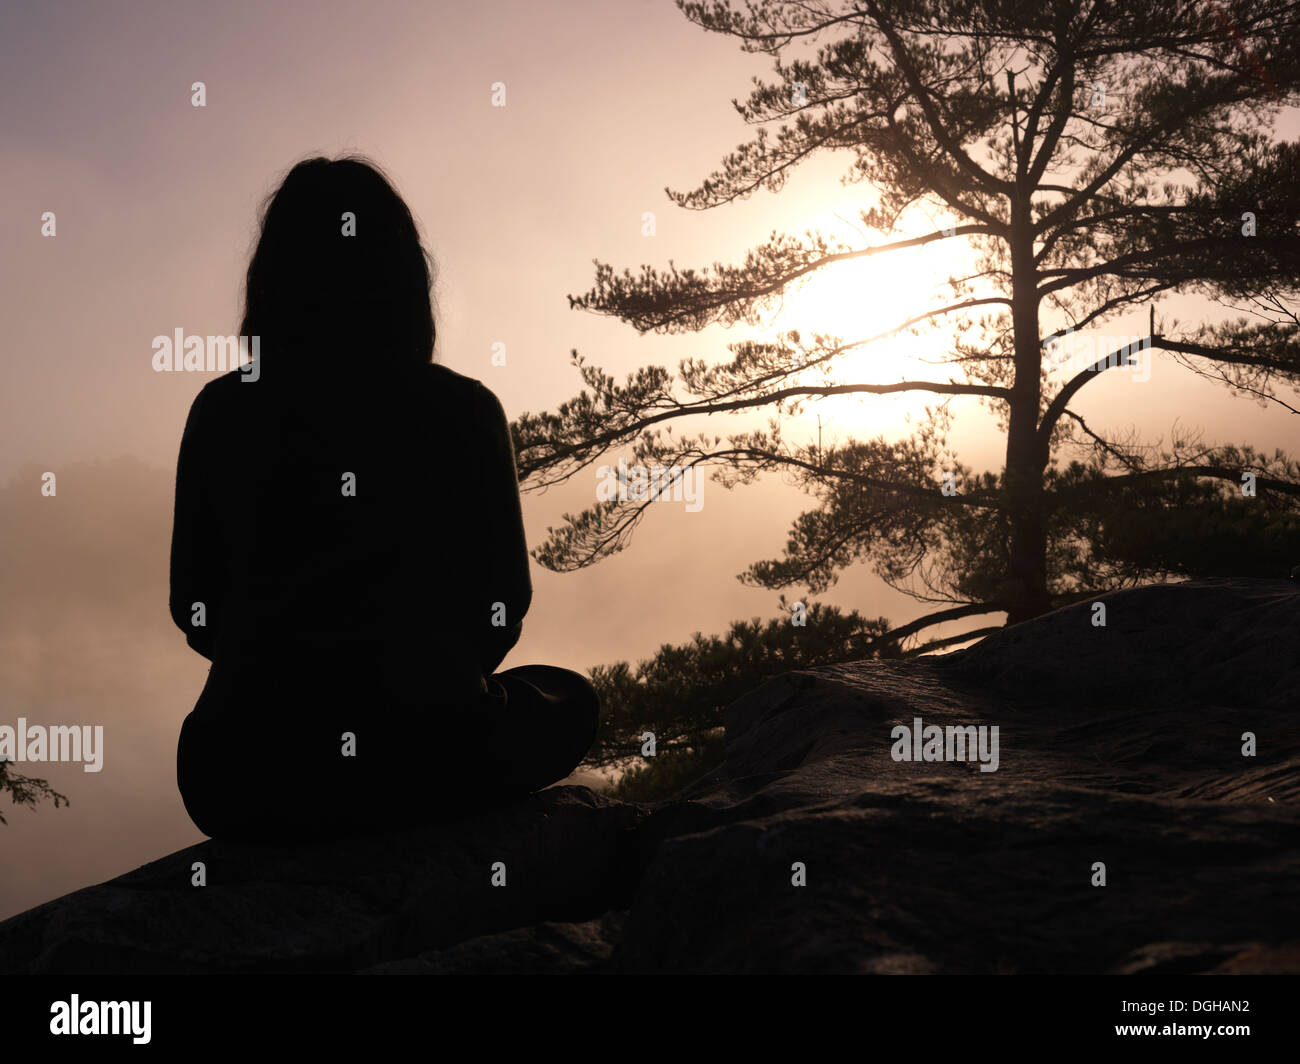 Silhouette of a woman sitting on rocks and facing sunrise sun, tranquil nature scenery, relaxation and meditation concept Stock Photo